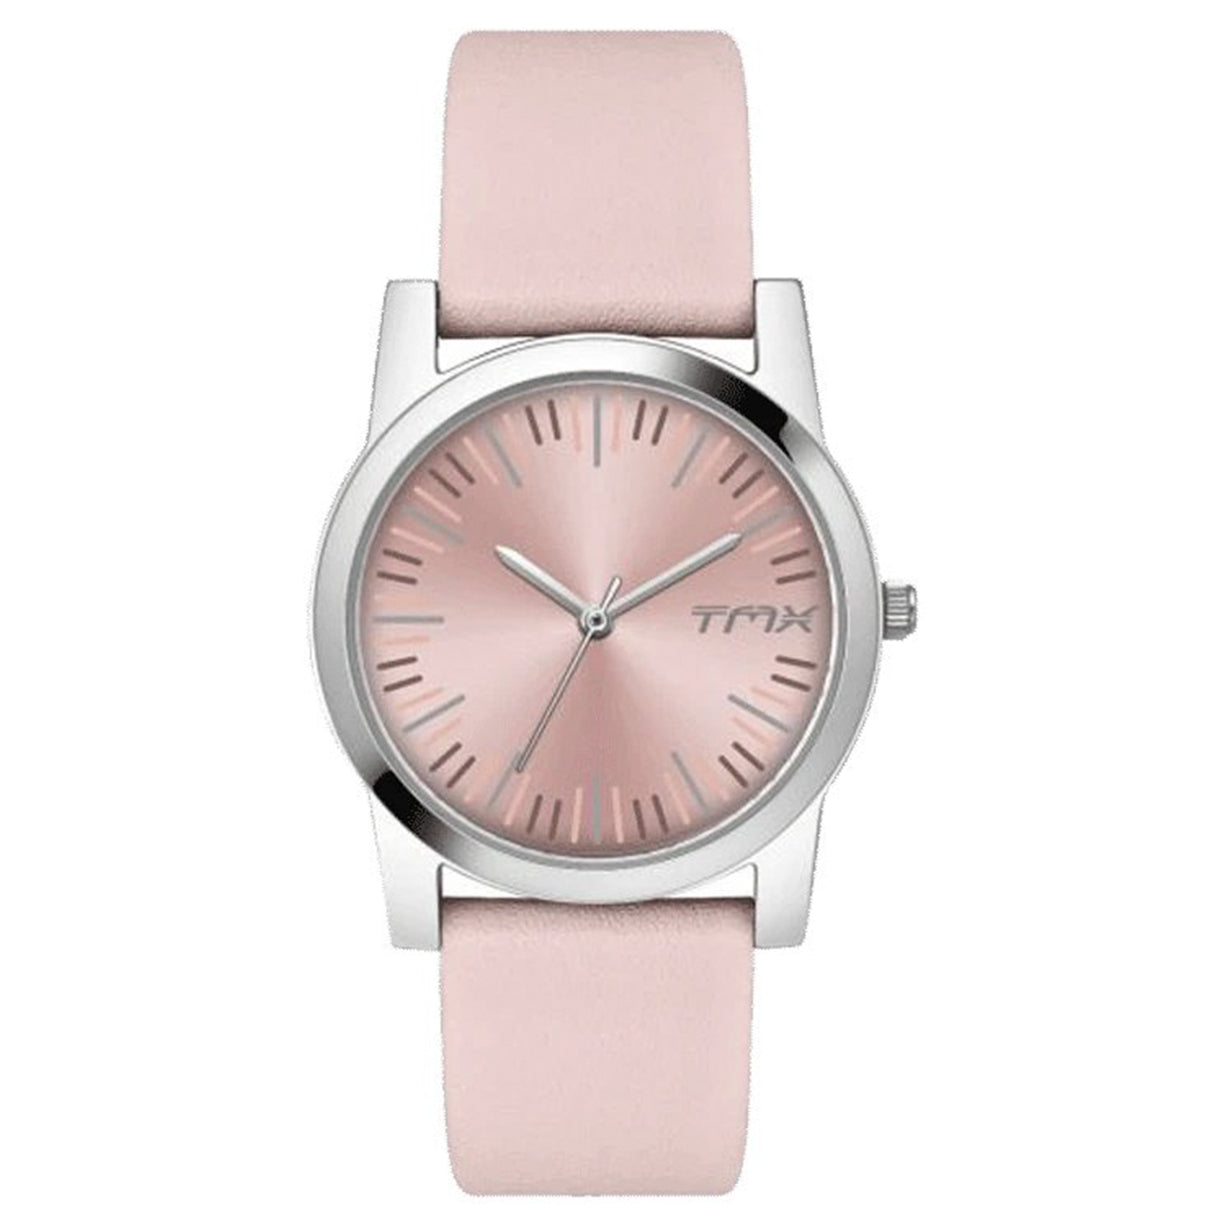 Floral Inspired Pink Dial Leather Strap